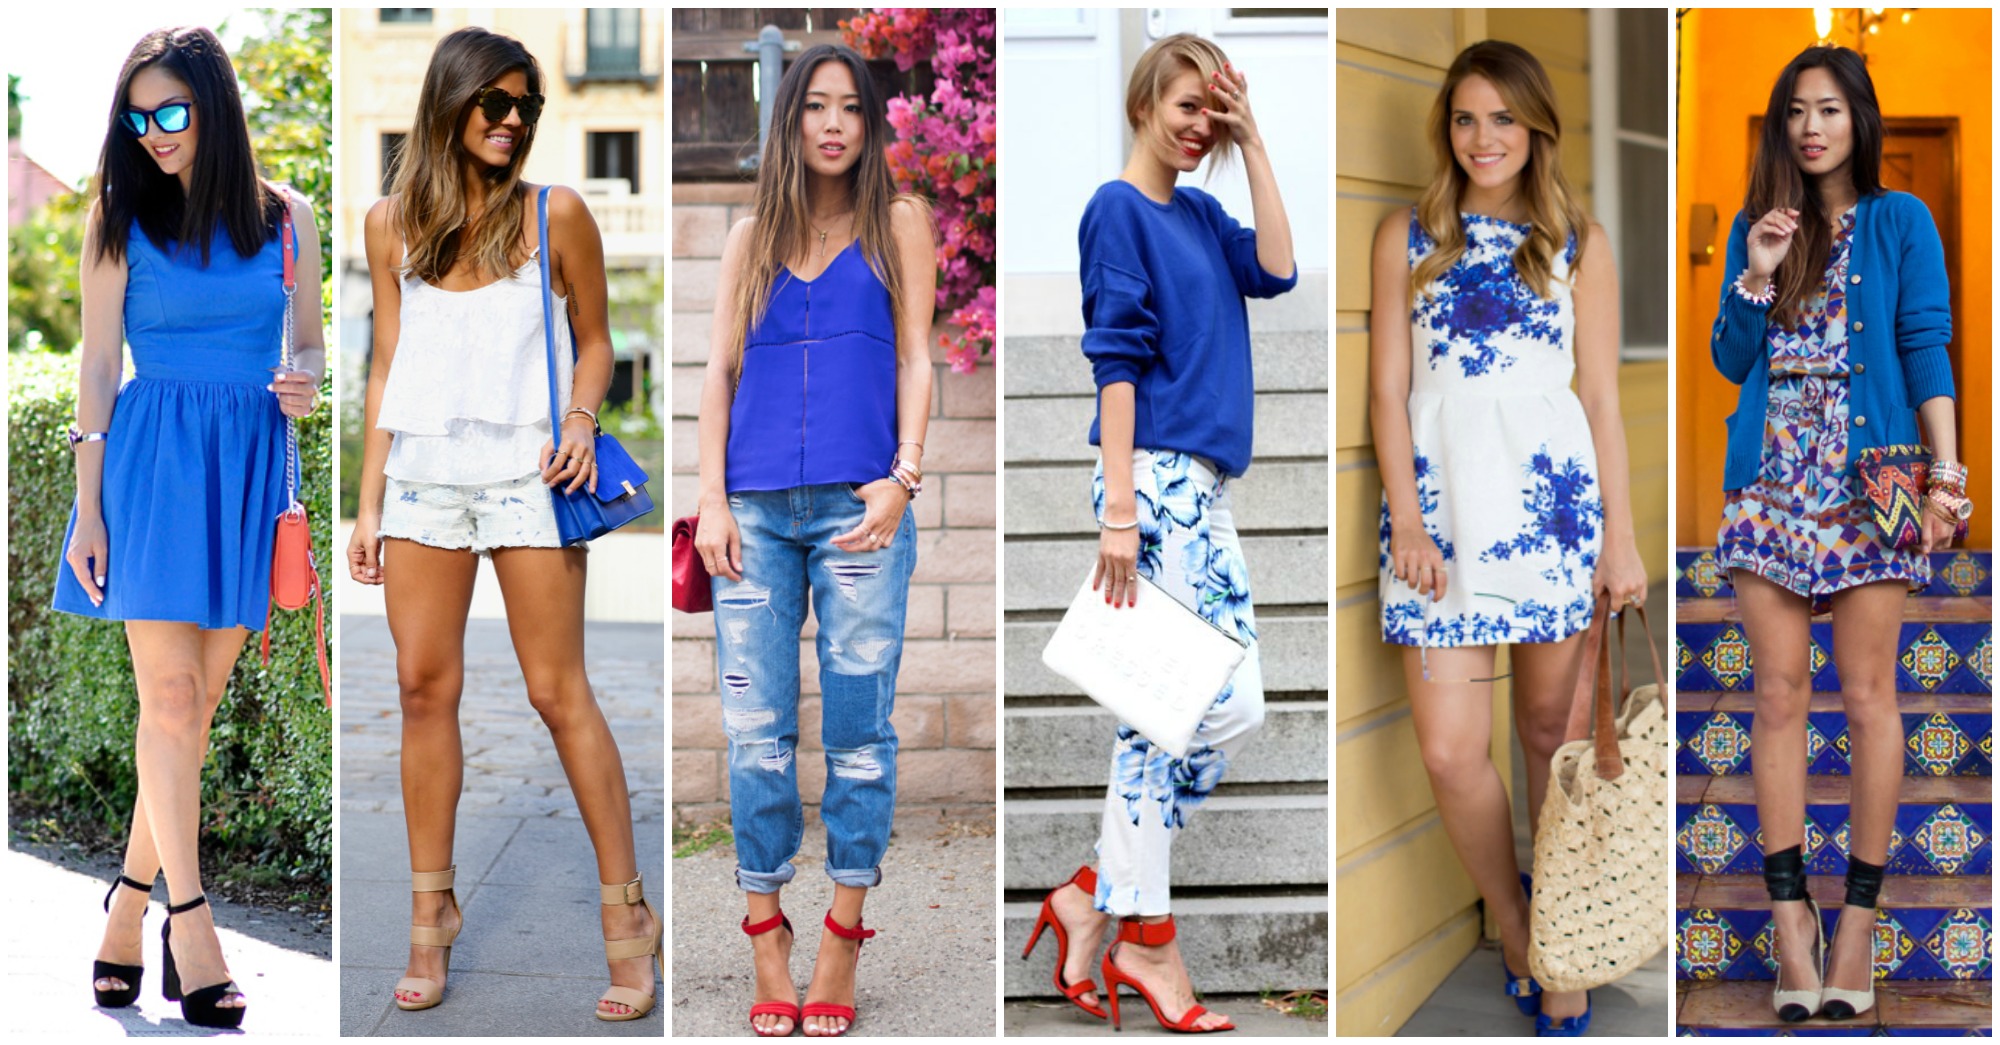 15 Royal Blue Combinations to Copy Right Now